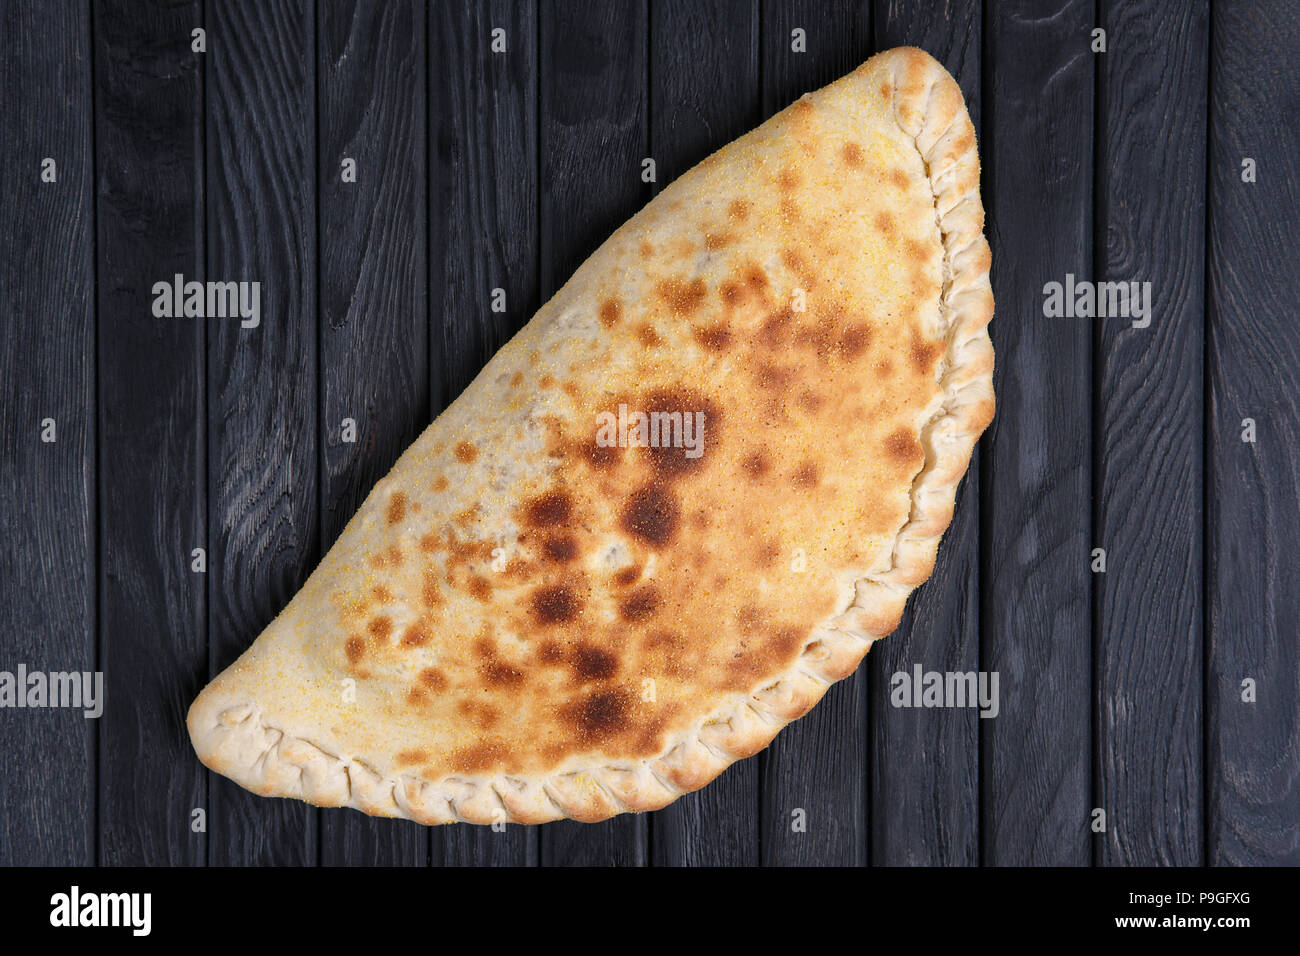 Fresh baked pizza calzone on dark wooden table, top view. Stock Photo